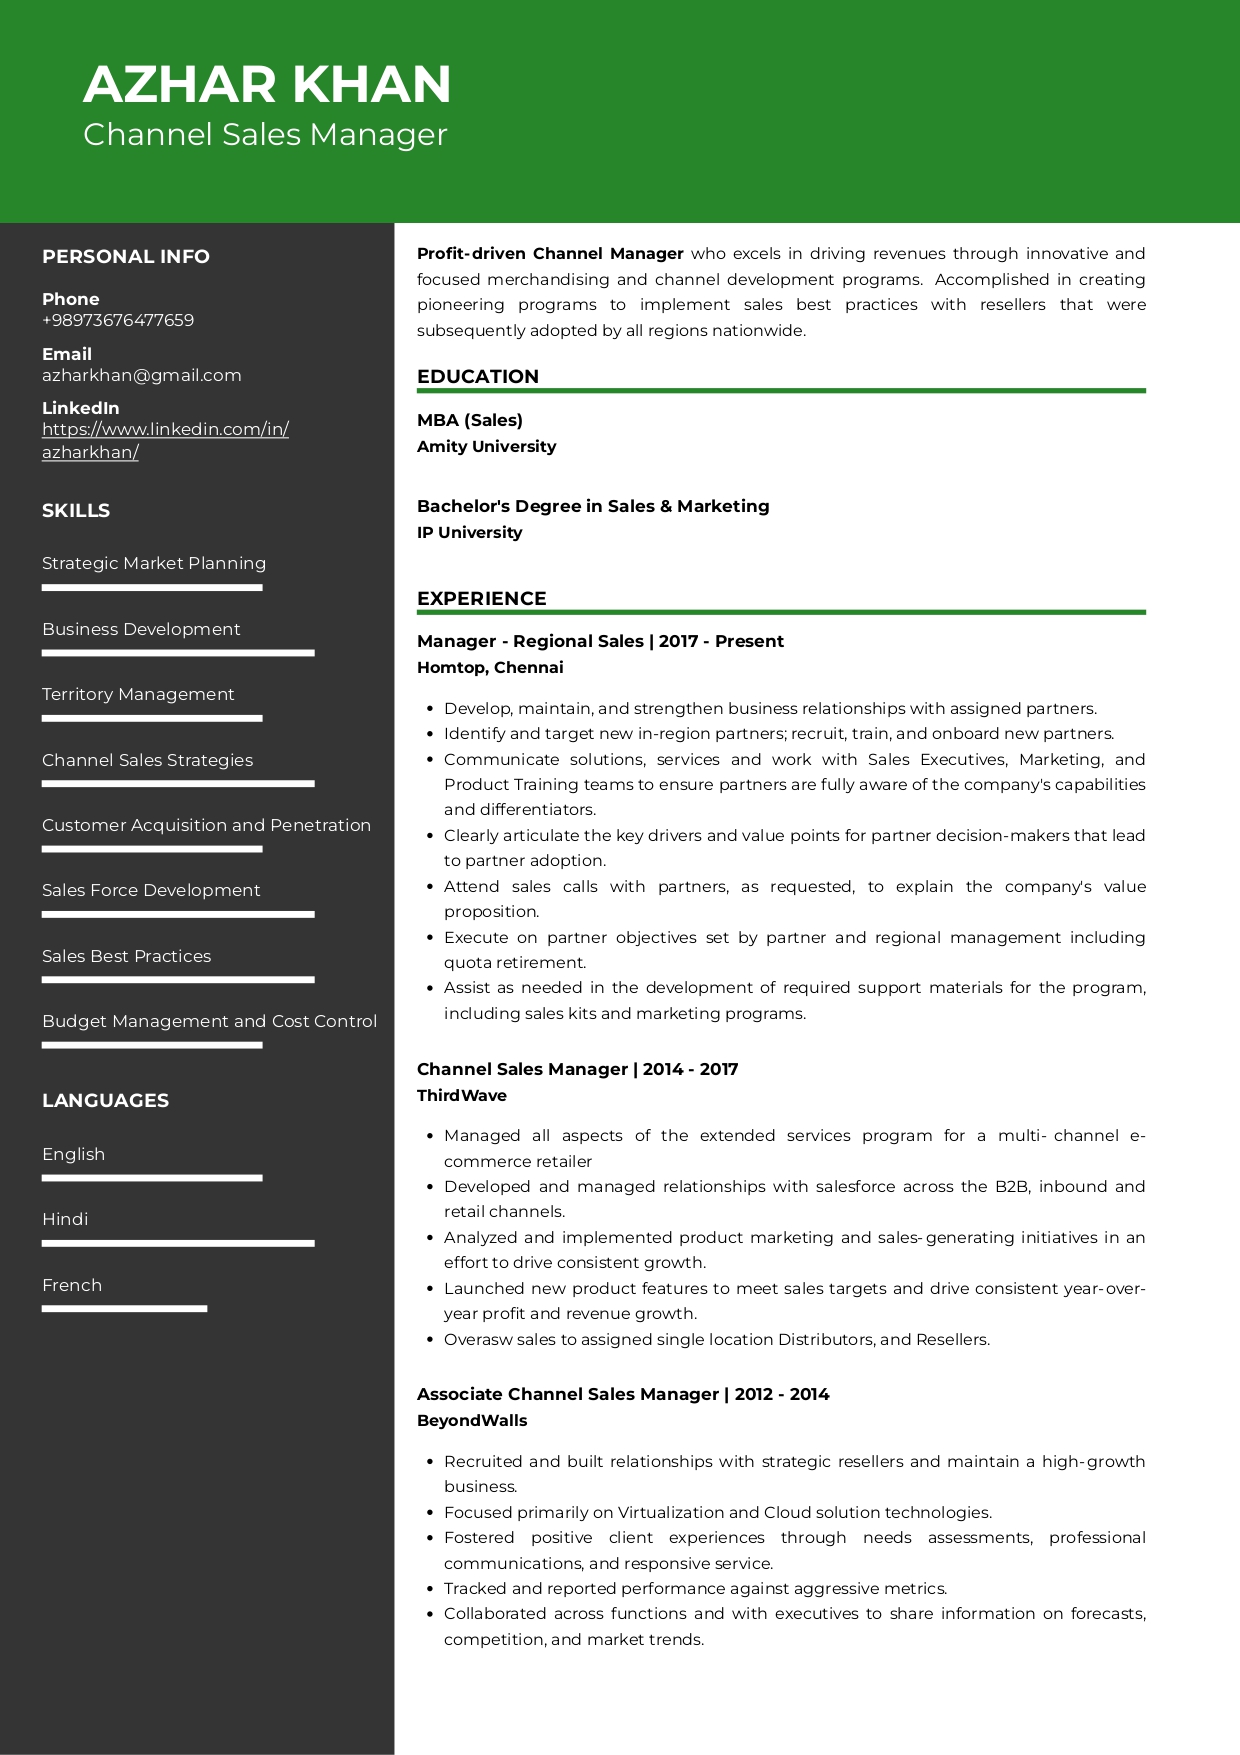 Resume of Channel Sales Manager